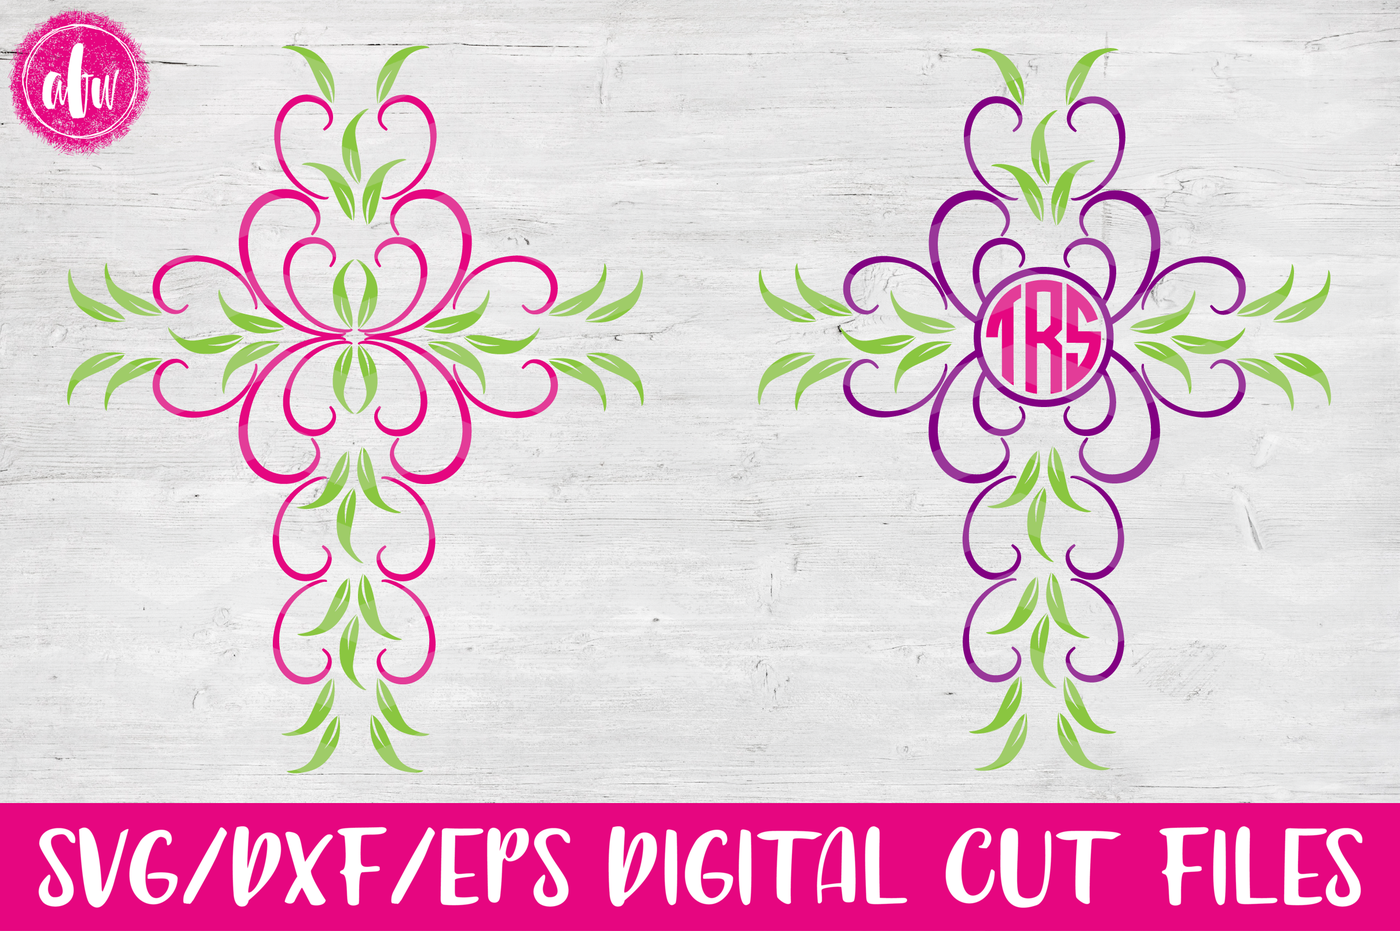 Download Monogram Cross - SVG, DXF, EPS Cut Files By AFW Designs ...